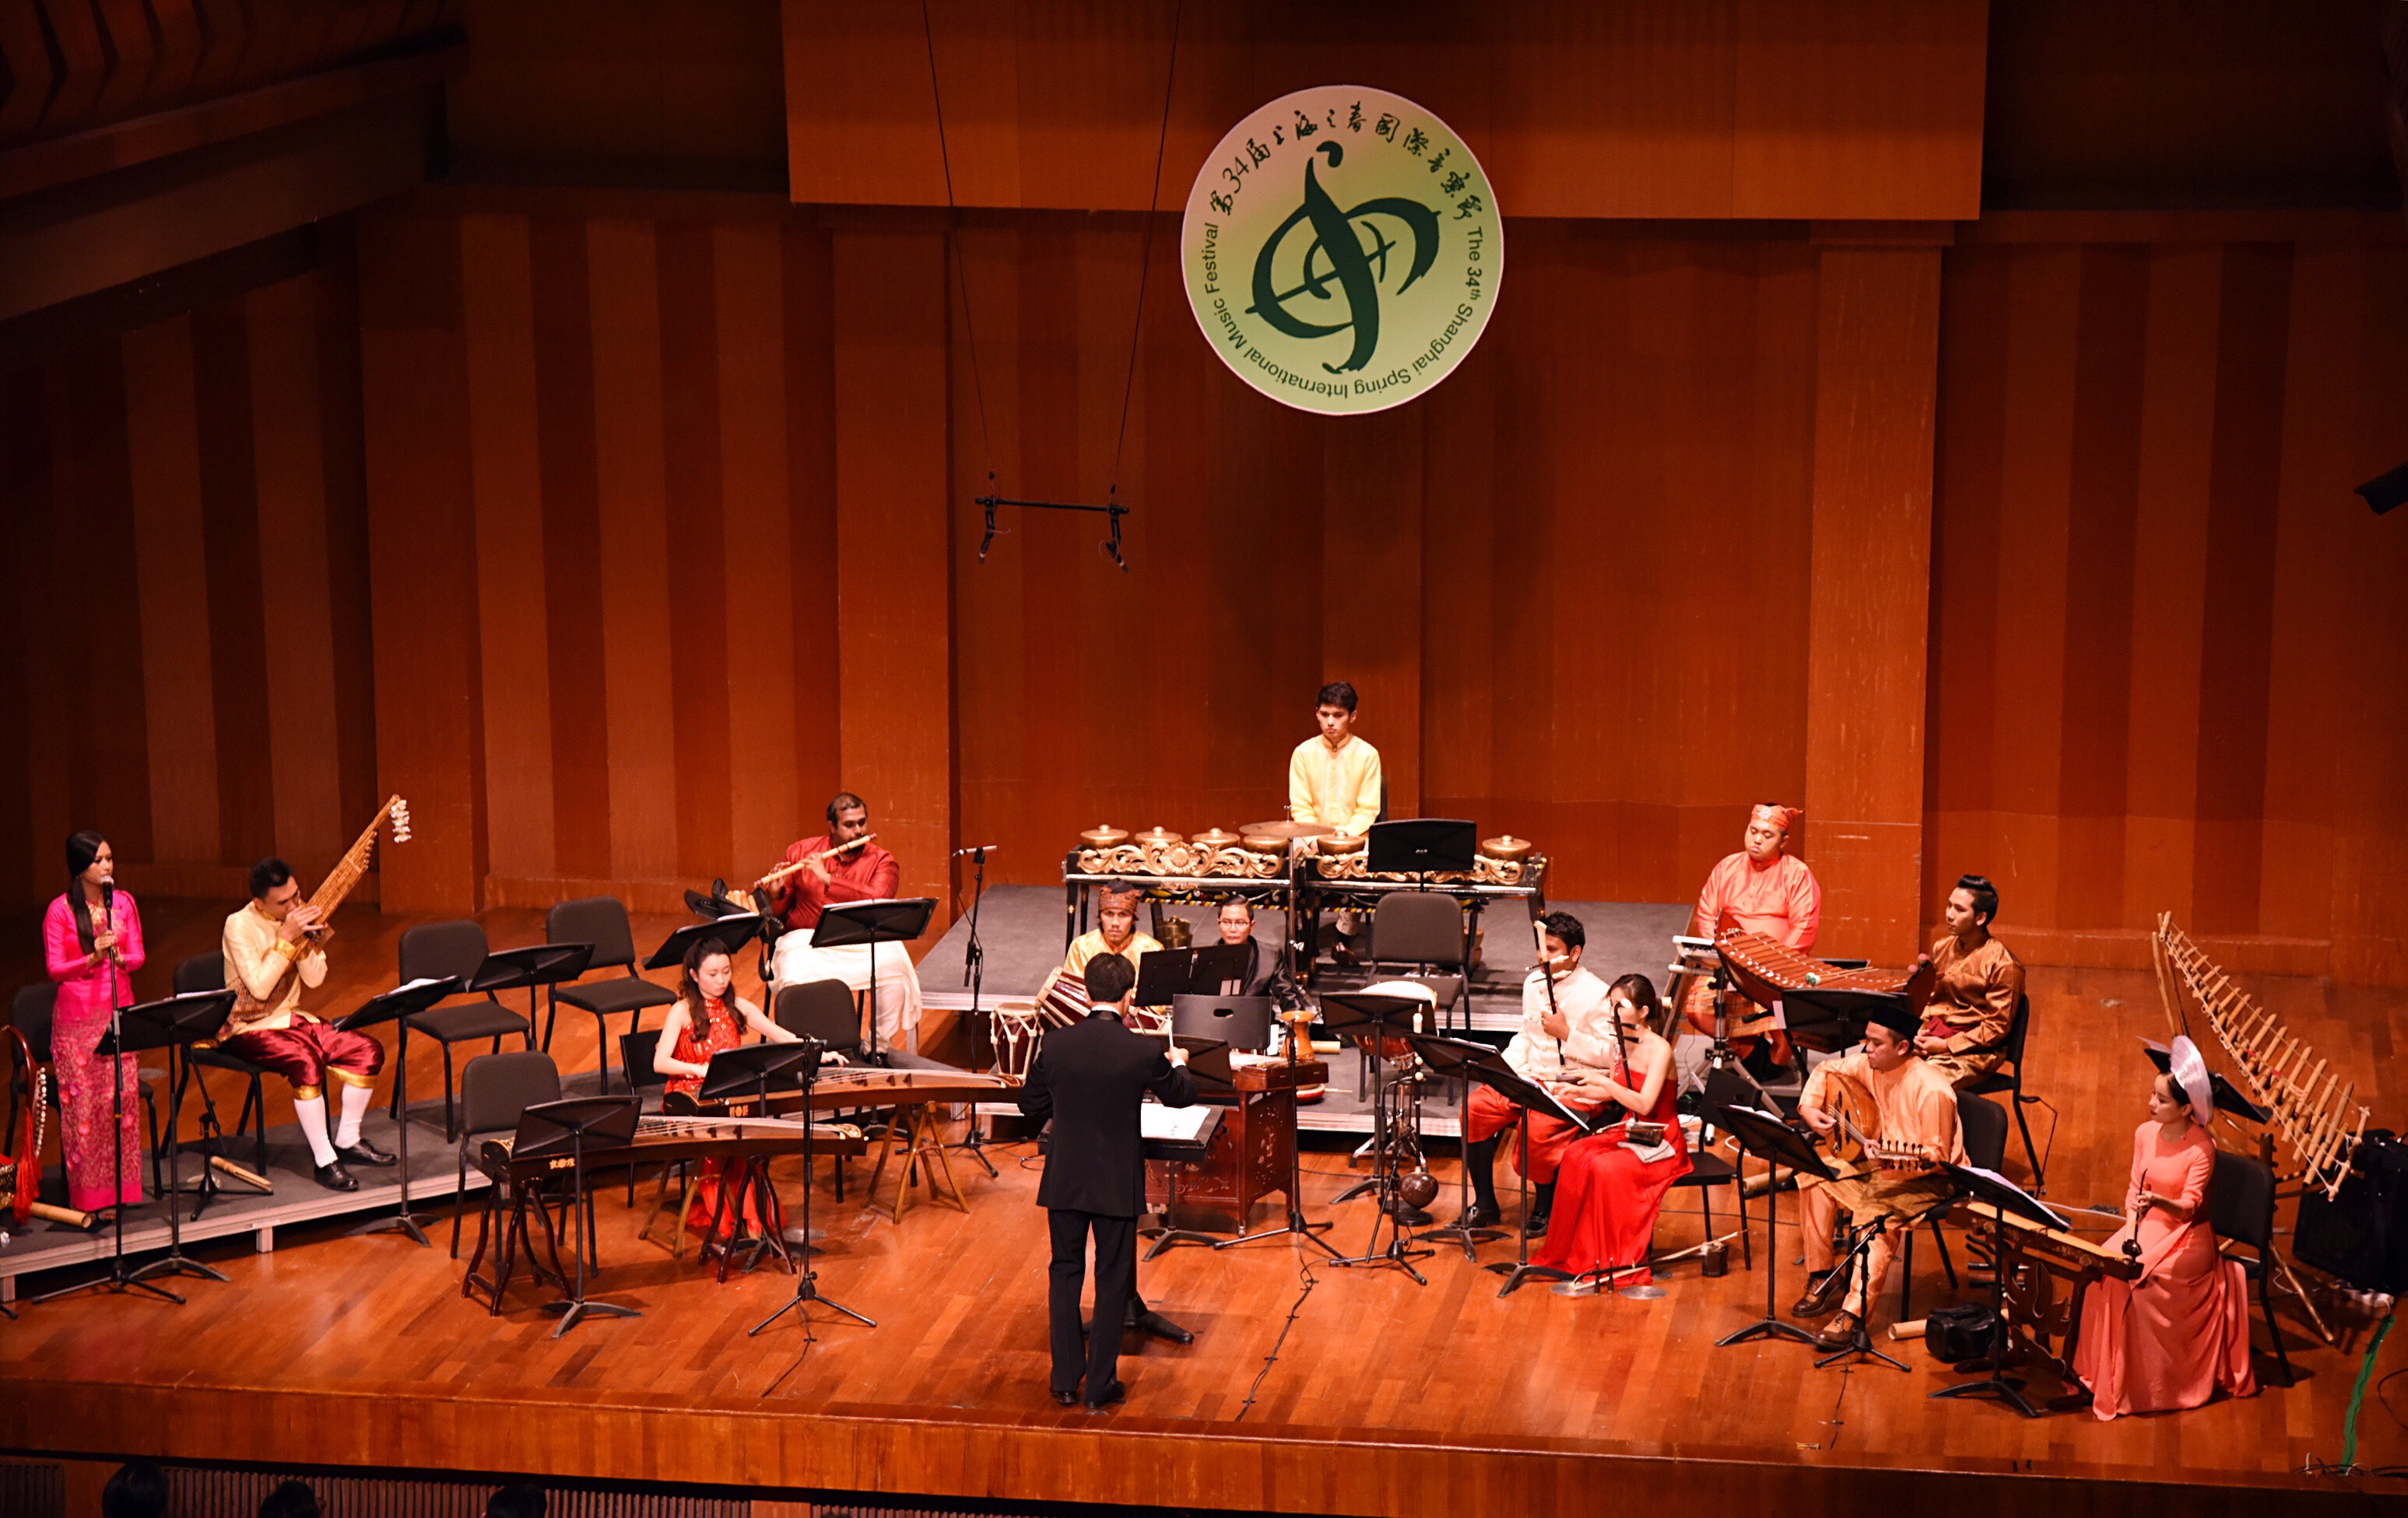 The C asean Consonant ensemble gave a concert with musicians from the Shanghai Conservatory of Music at the school’s He Lvting Concert Hall on May 15th, 2017. [Photo: provided by the Shanghai Conservatory of Music.]